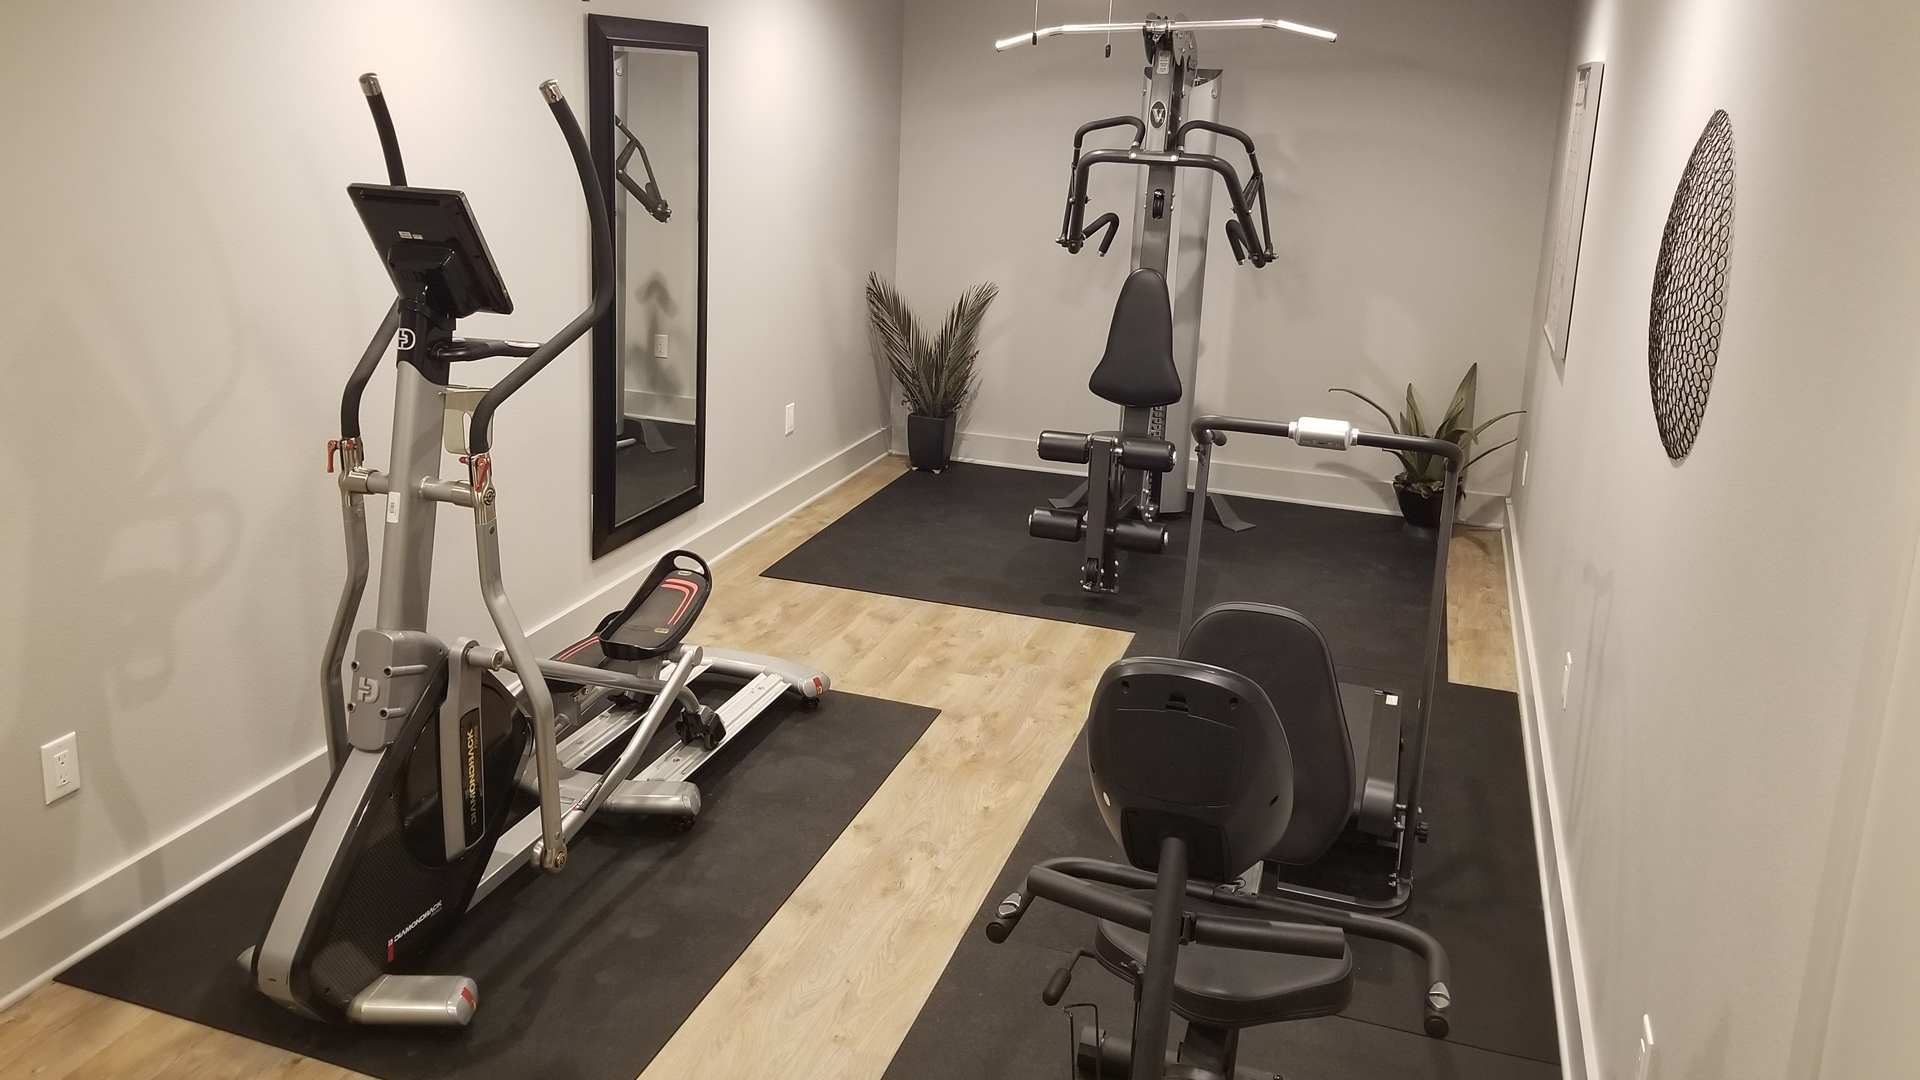 Our fitness center features a professional home gym, elliptical